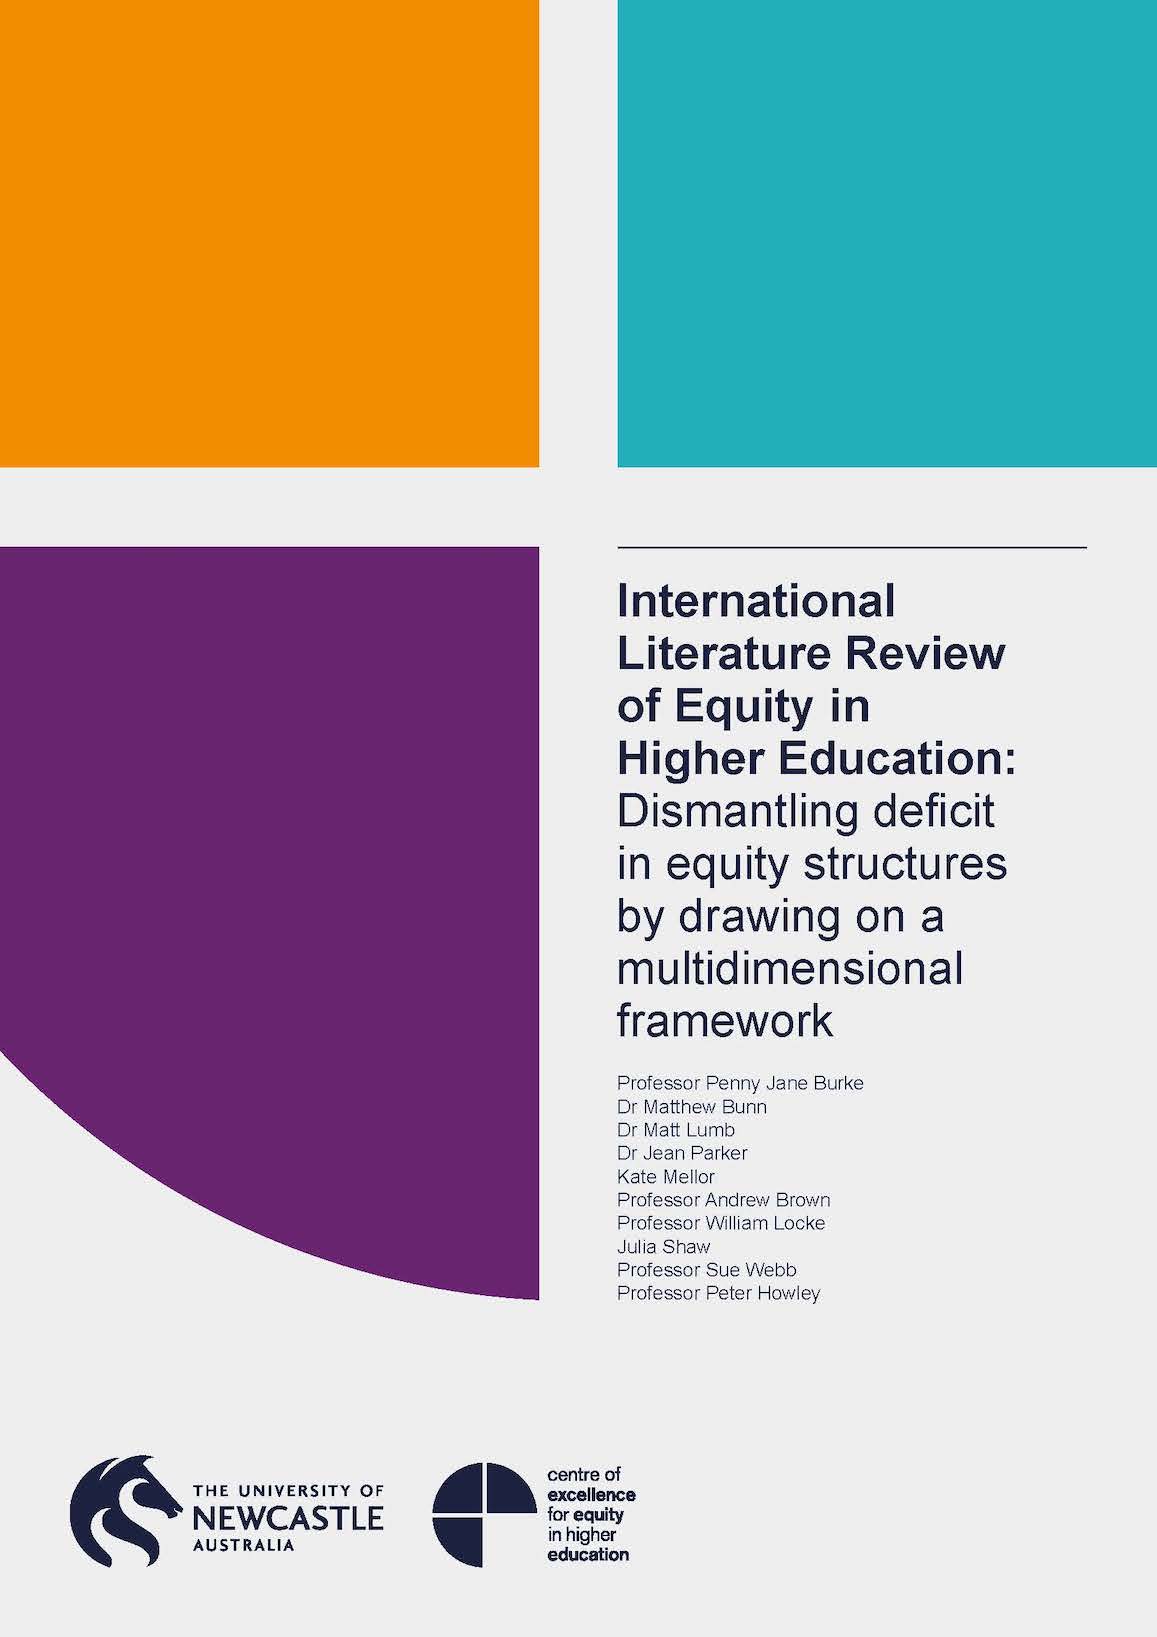 International literature review of equity in higher education: dismantling deficit in equity structures by drawing on a multidimensional framework